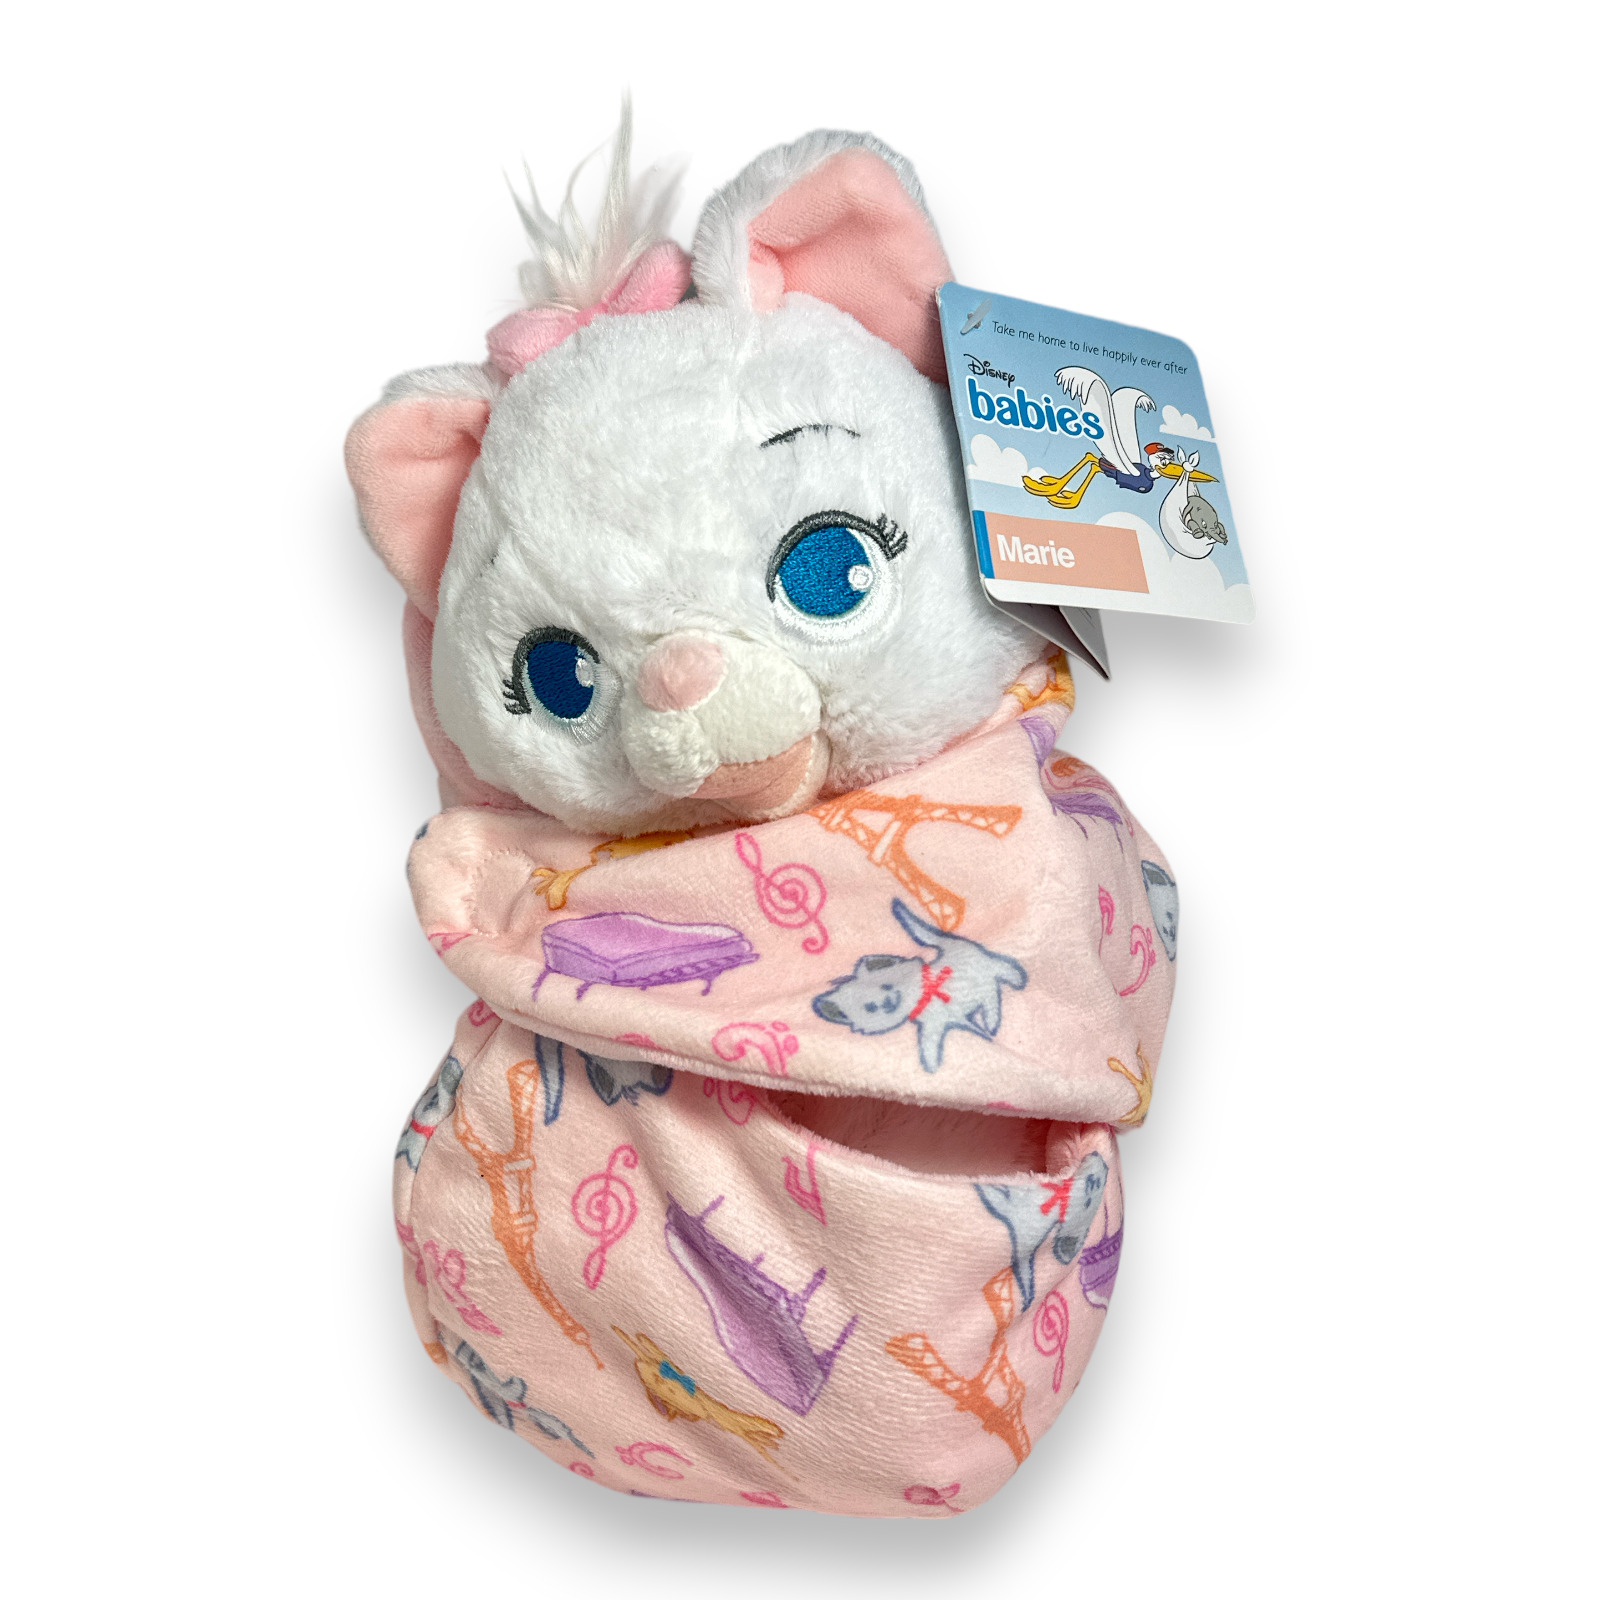 Disney's Babies Plush Doll with Blanket Pouch - Small (Marie) 10 1/4'' NEW